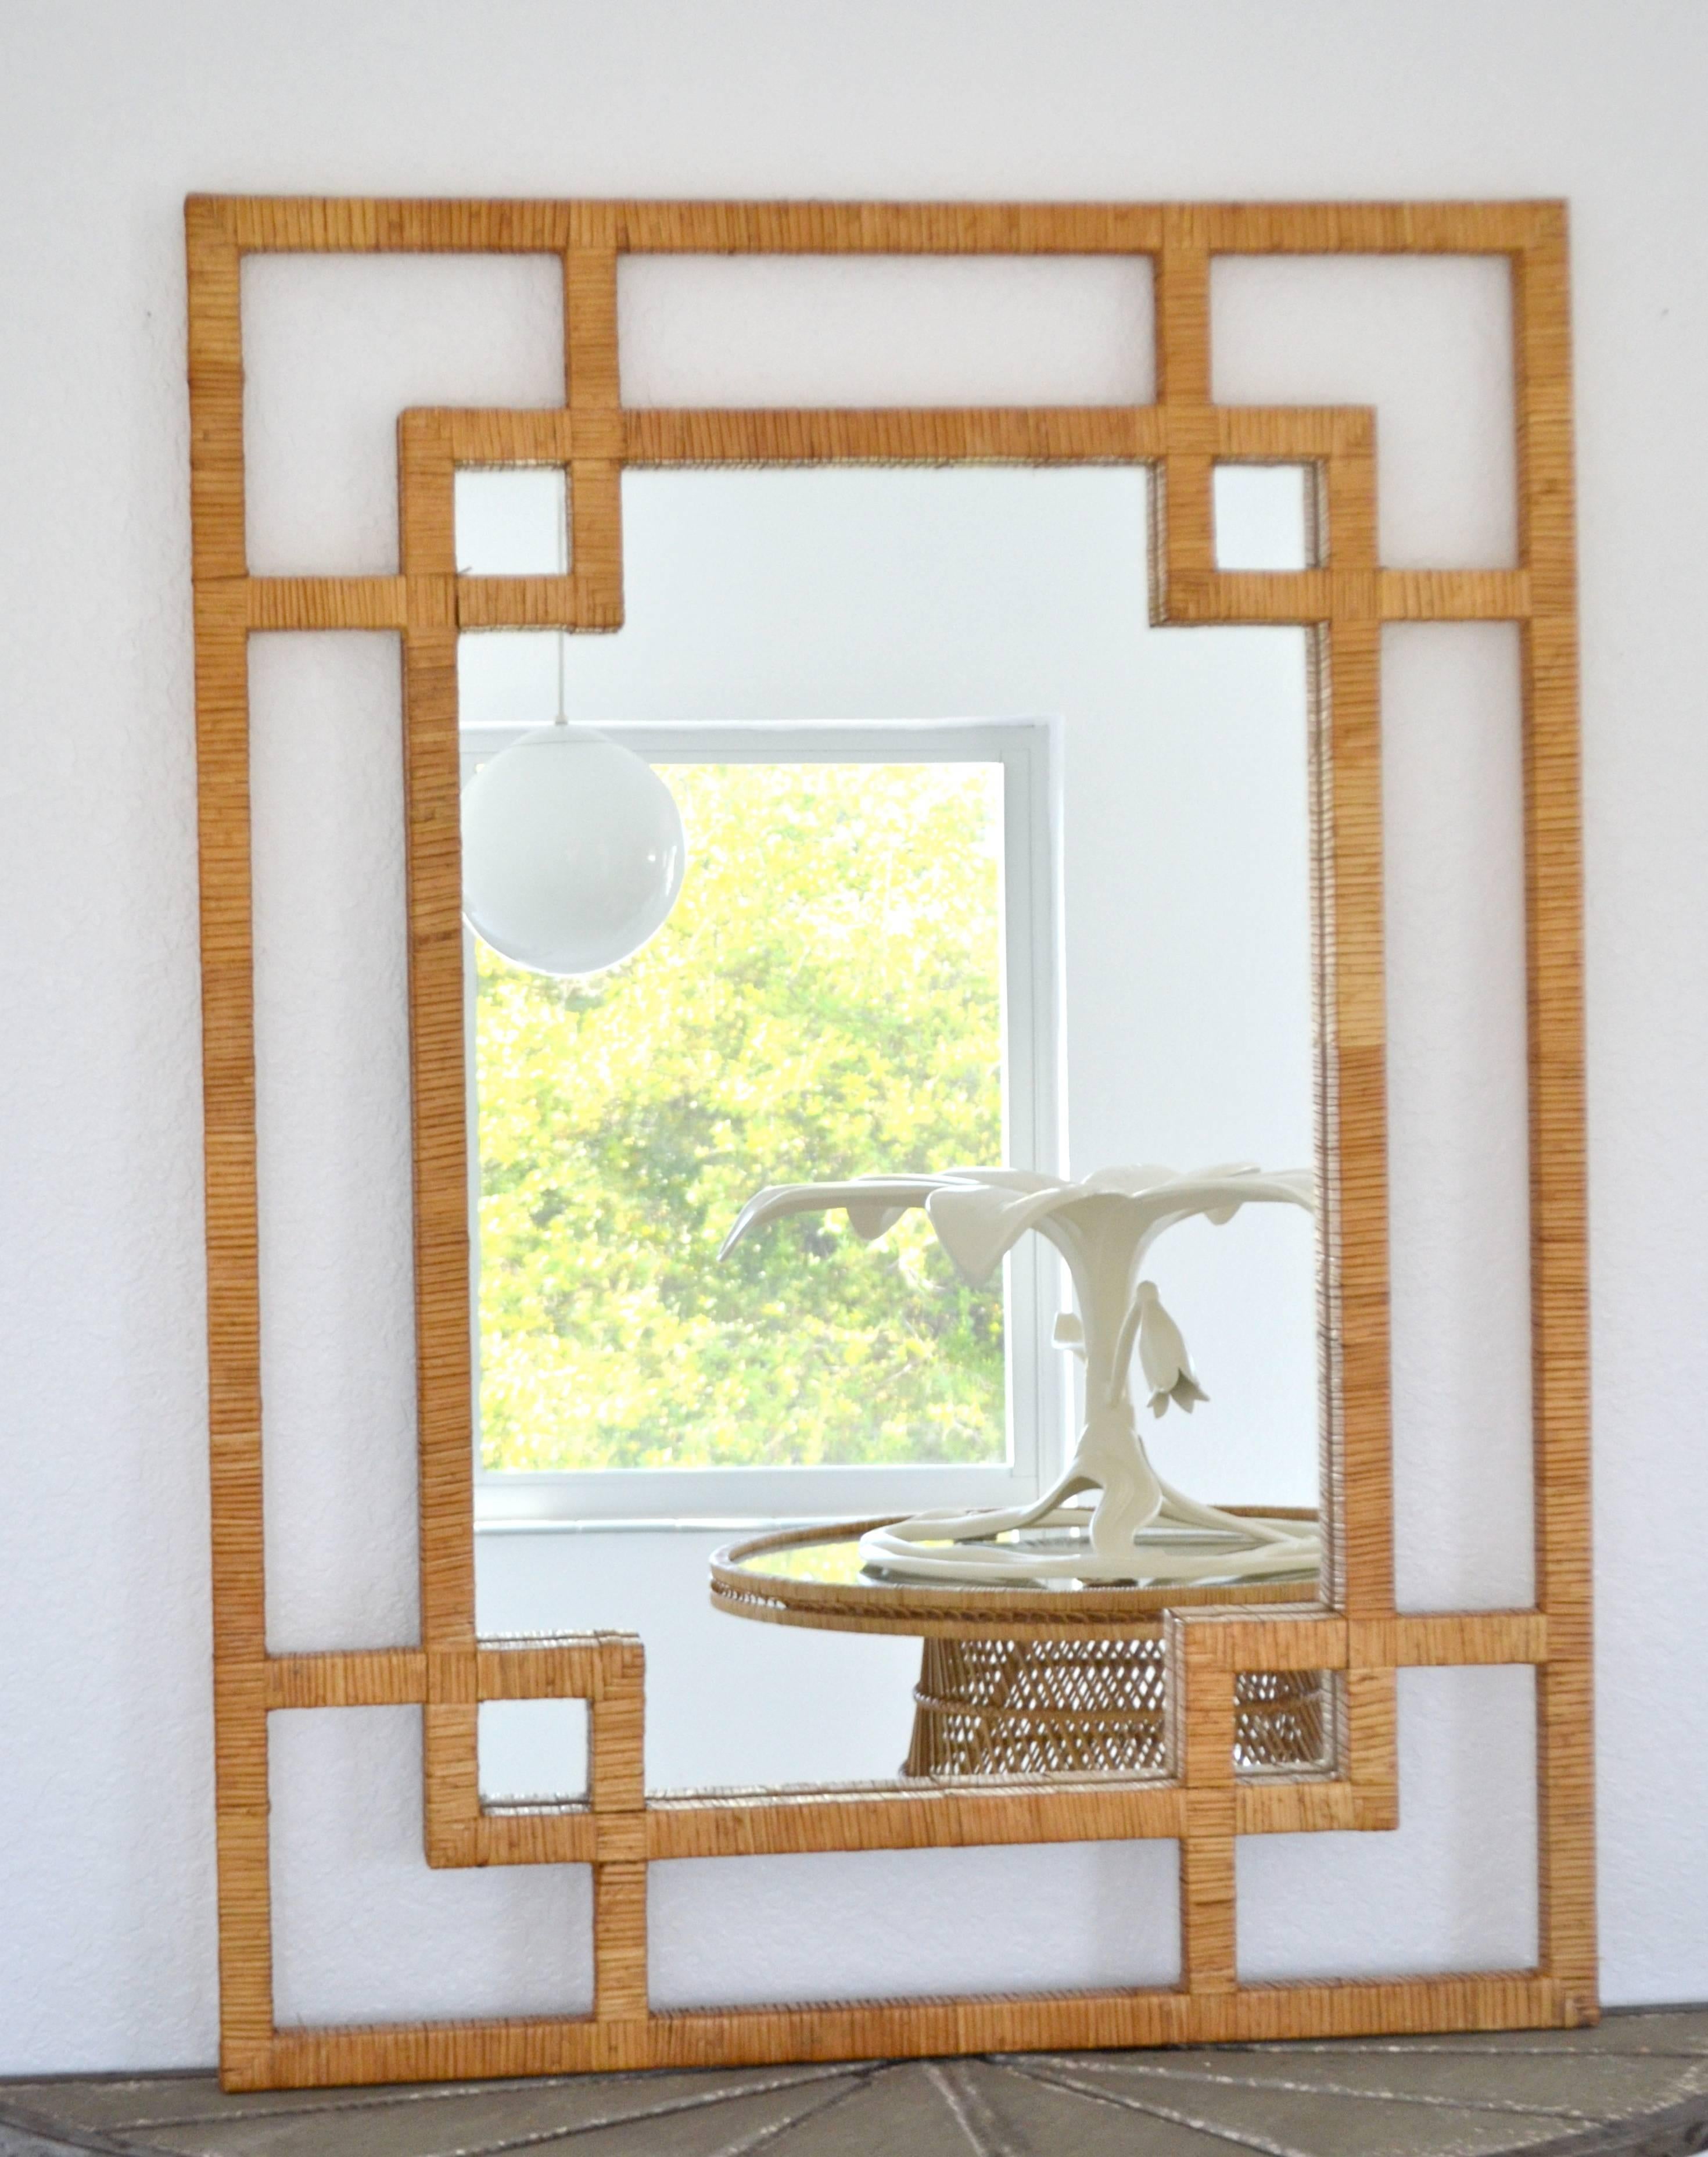 Striking midcentury rattan wall mirror, circa 1960s-1970s. This stunning artisan crafted rectangular mantel mirror is embellished with a highly decorative open fretwork surround. Measurements: The outer frame is 48